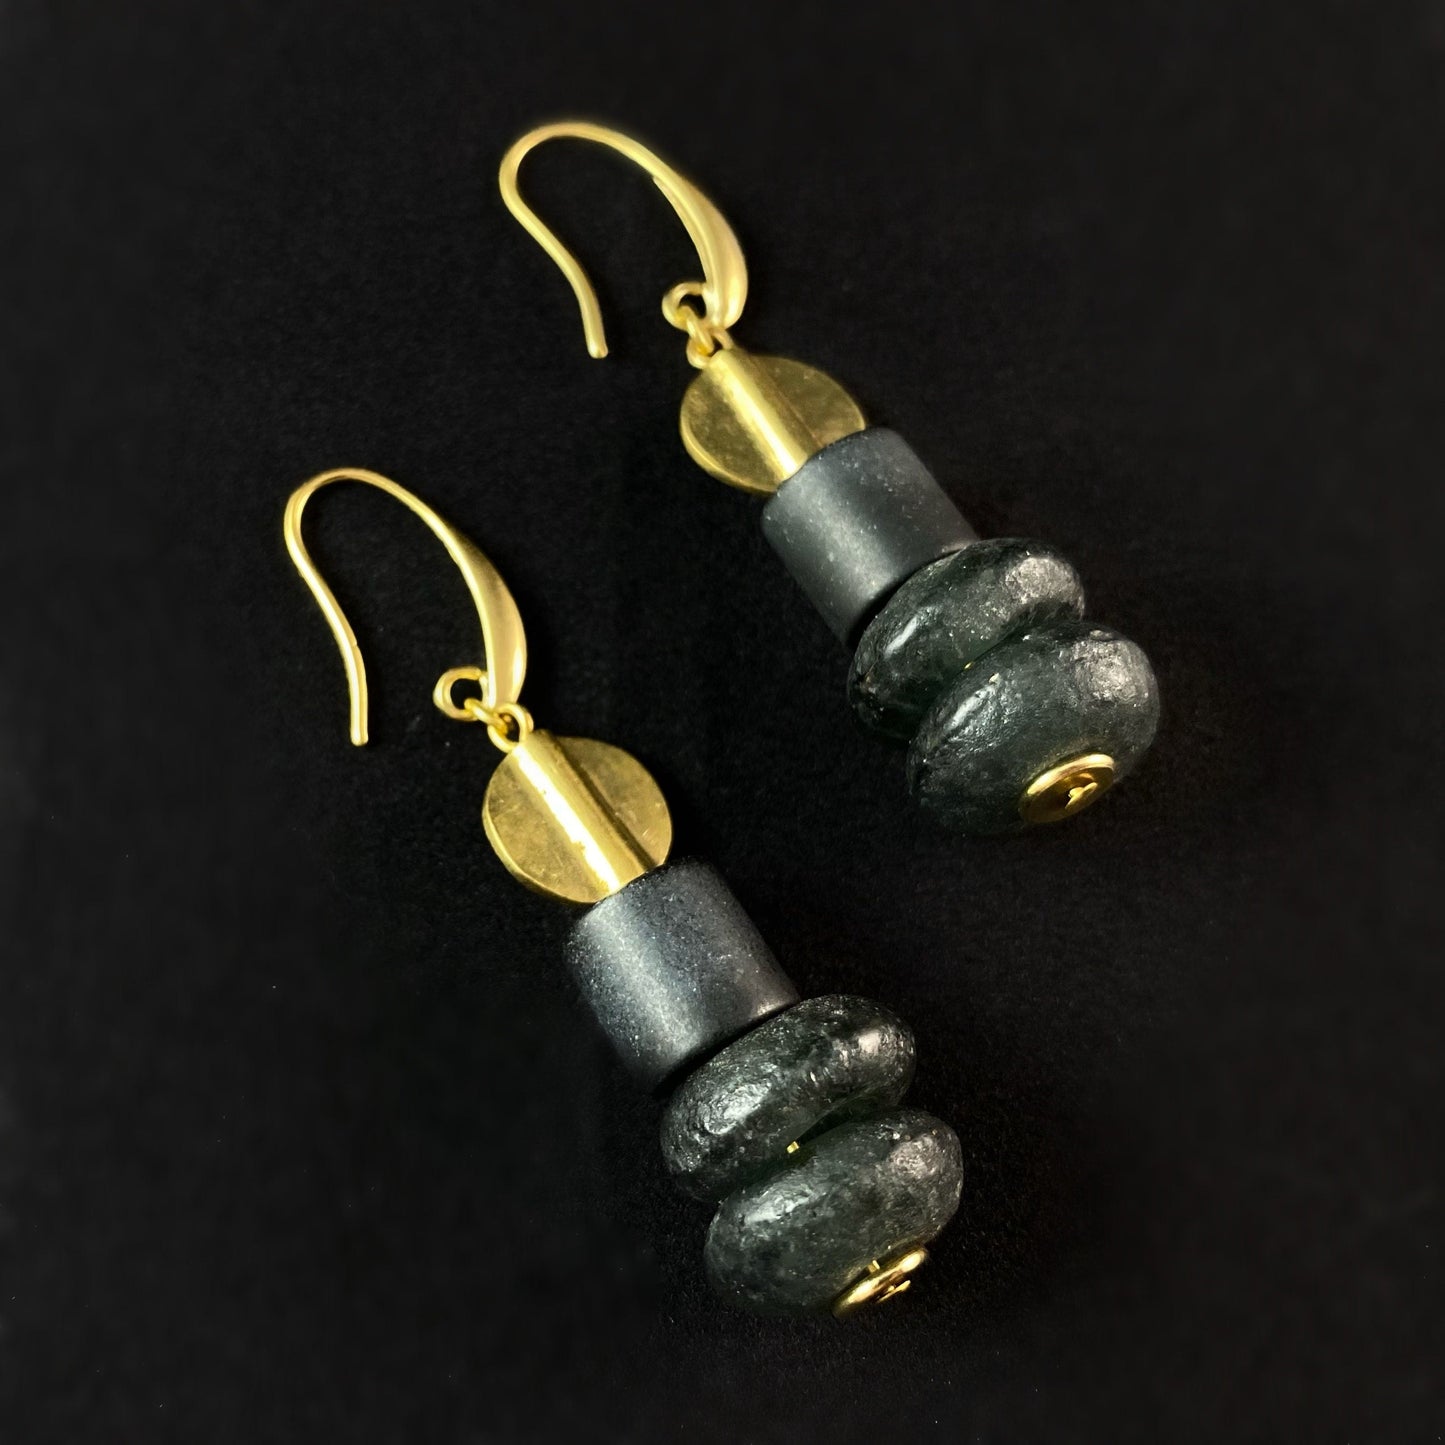 Gold and Black Drop Earrings - 18kt Gold Over Brass with Black Agate, David Aubrey Jewelry